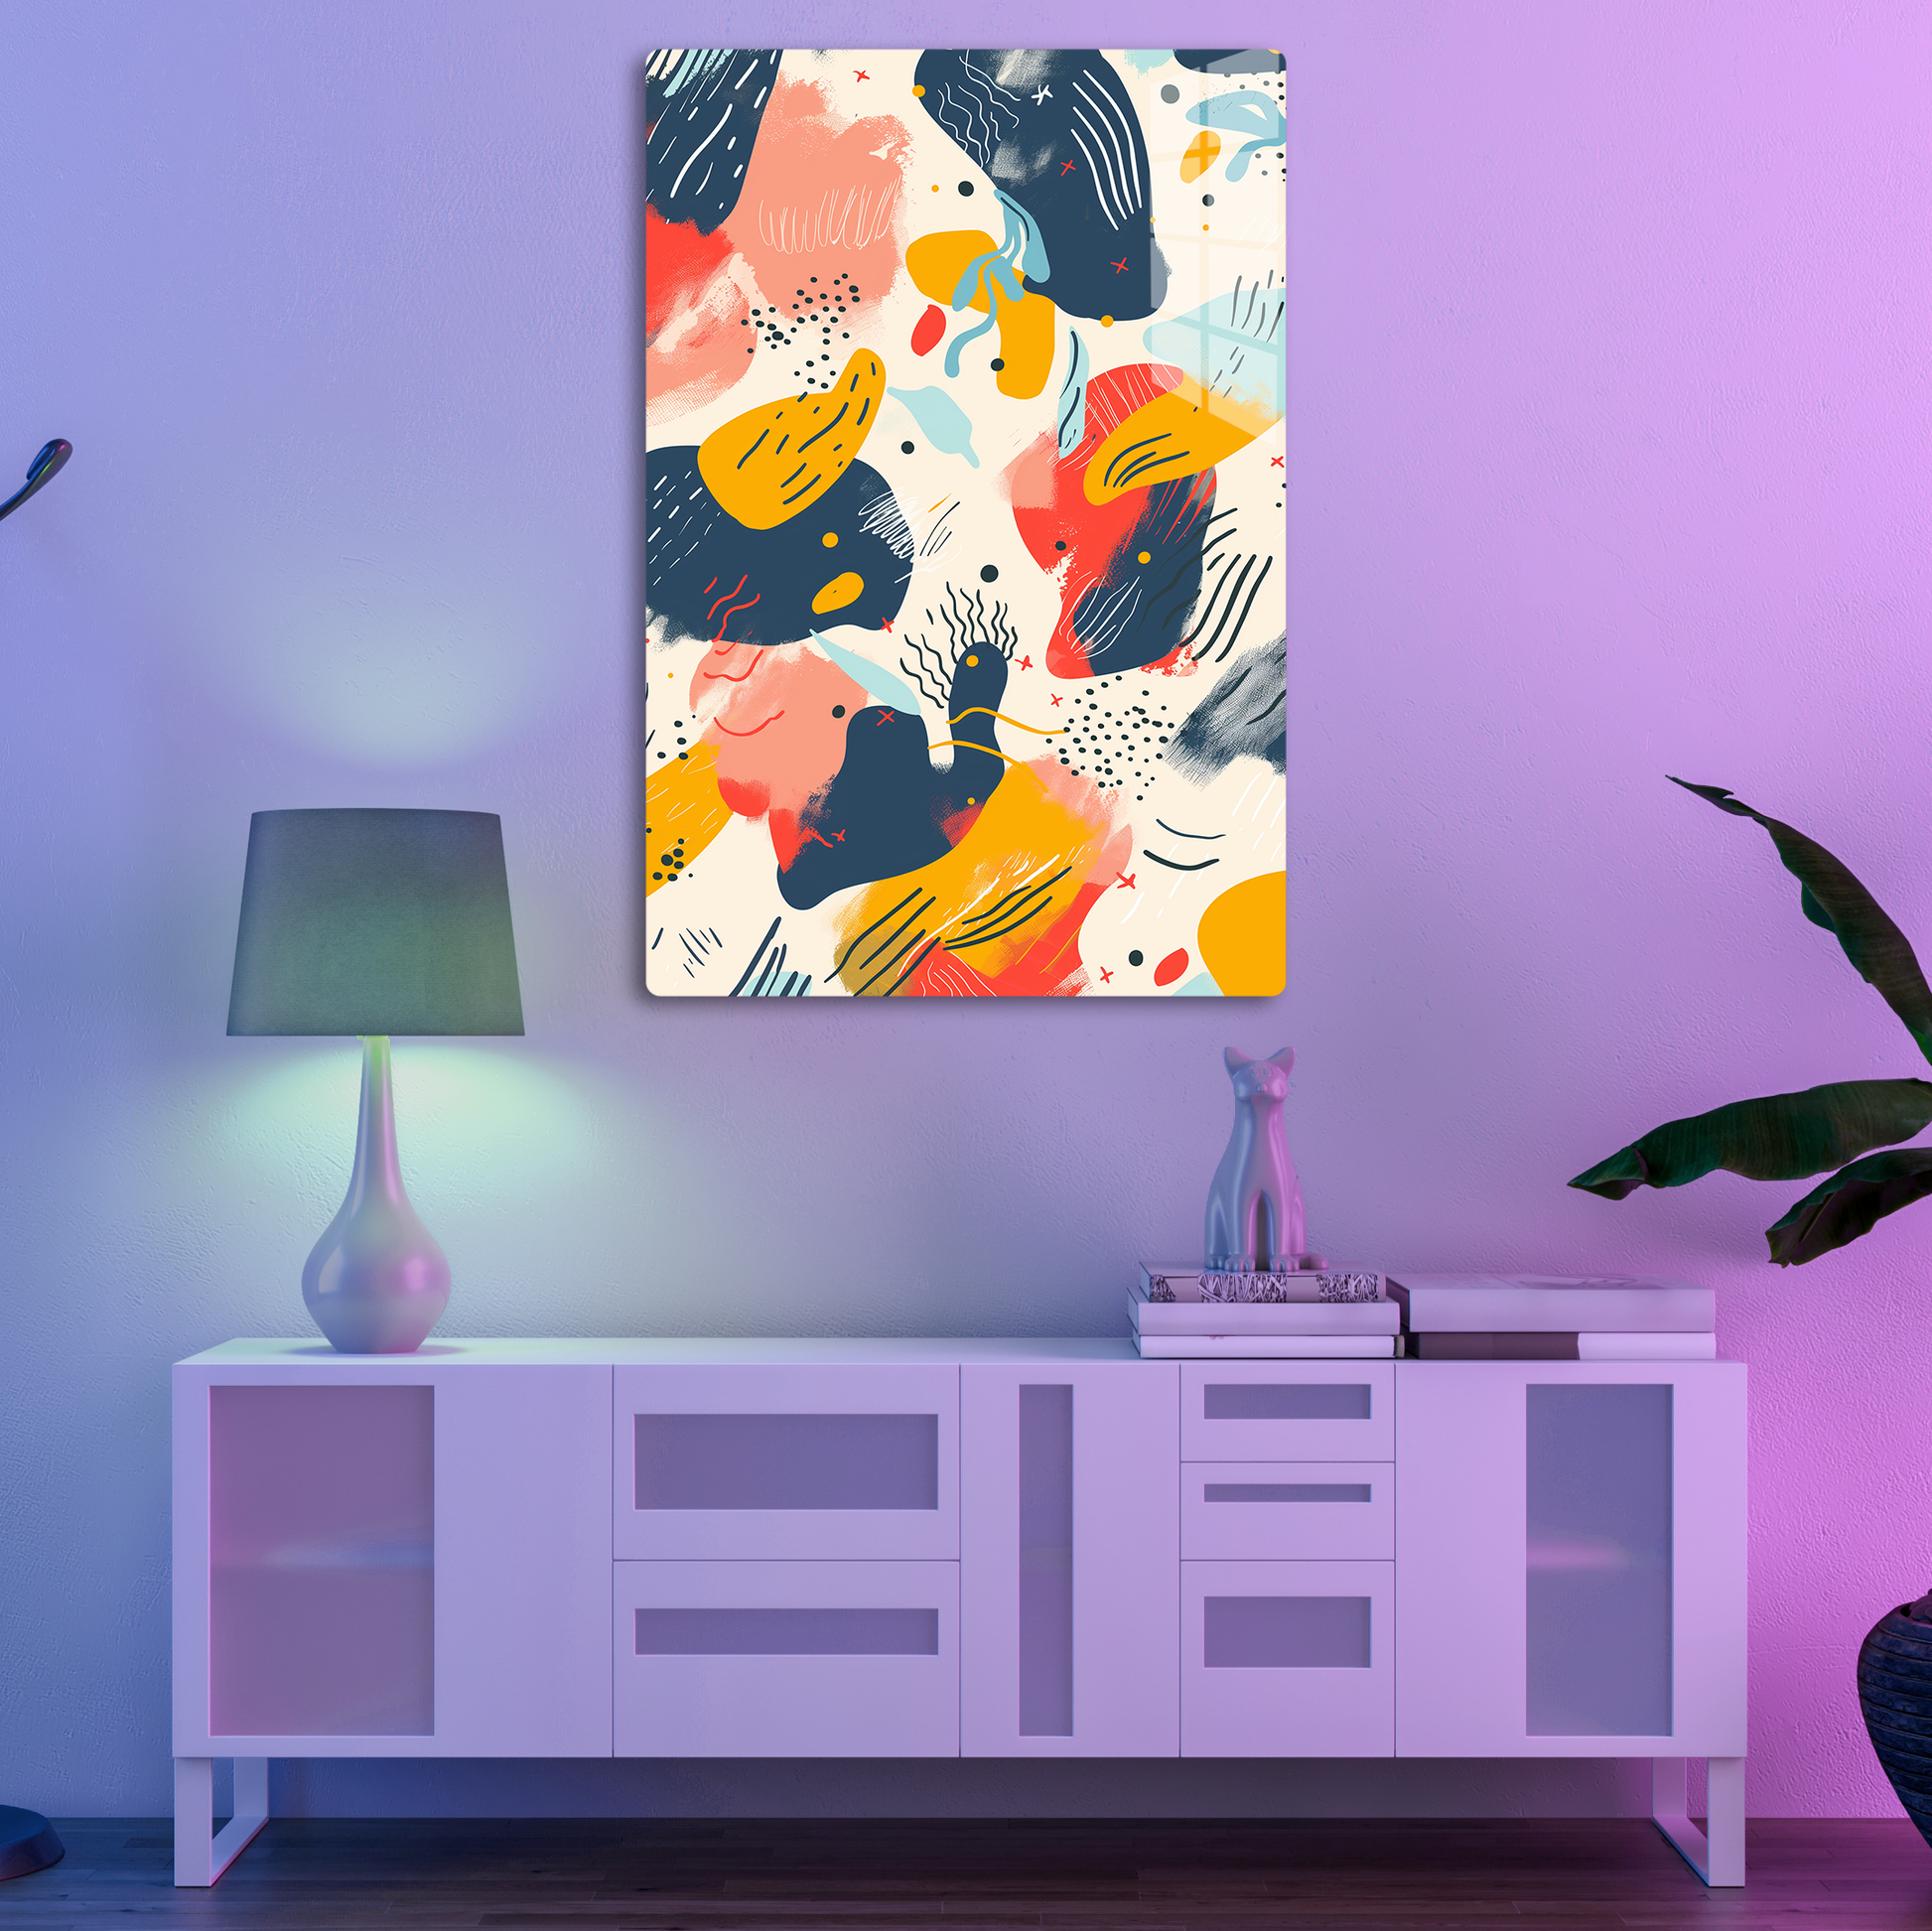 Abstract Play (Acrylic)Step into the universe with an Modern abstract art with bold splashes of color. Acrylic art from RimaGallery. Experience the cosmos in your home with vibrant, ethicaRimaGallery